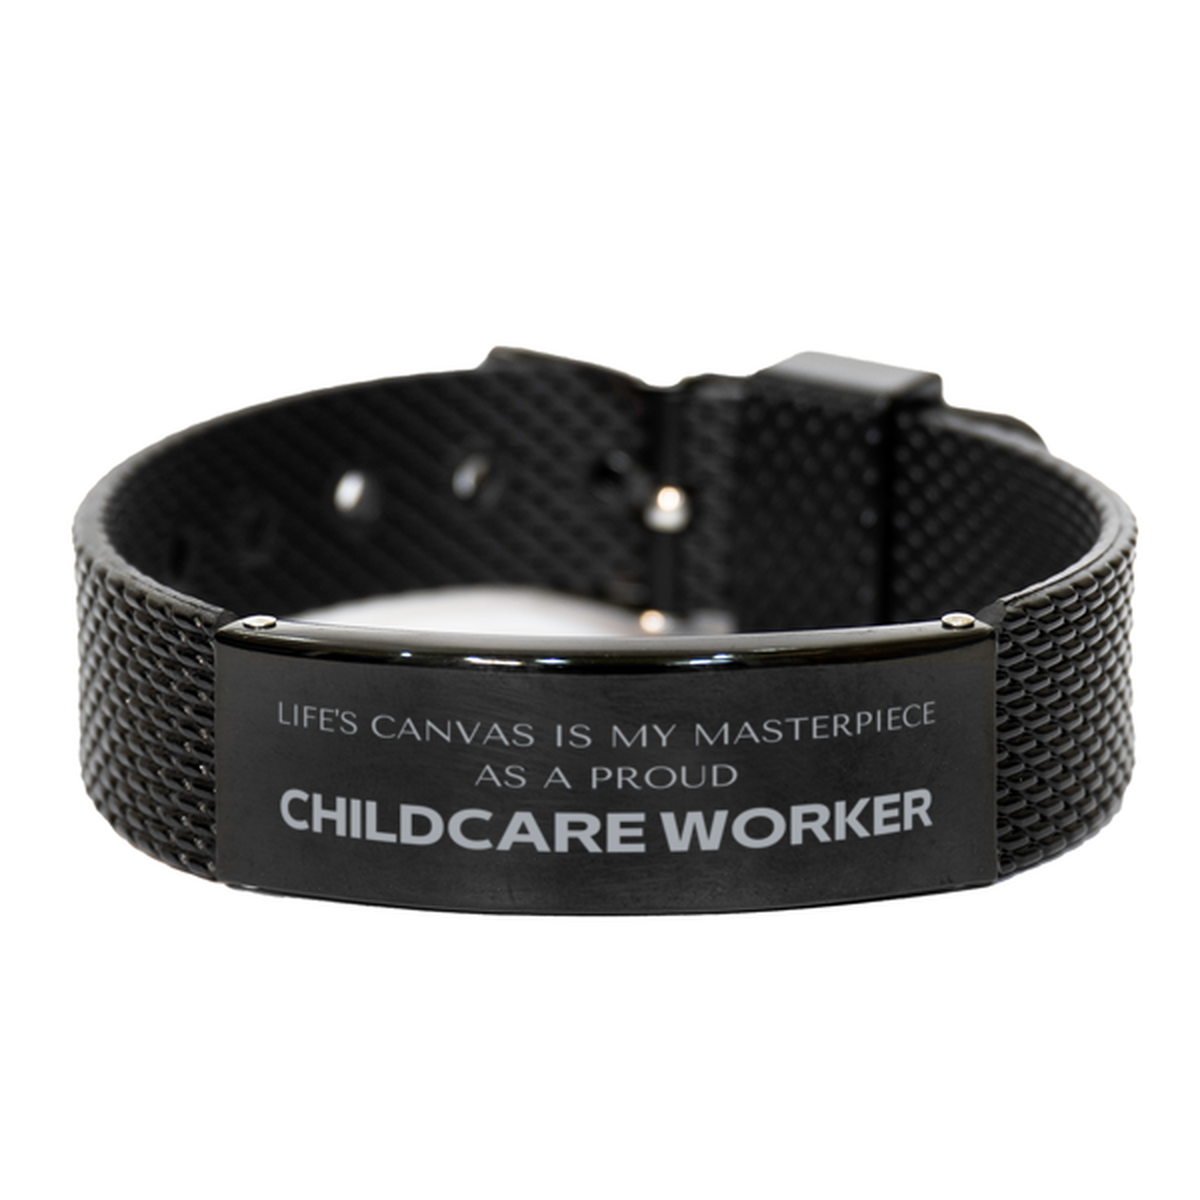 Proud Childcare Worker Gifts, Life's canvas is my masterpiece, Epic Birthday Christmas Unique Black Shark Mesh Bracelet For Childcare Worker, Coworkers, Men, Women, Friends